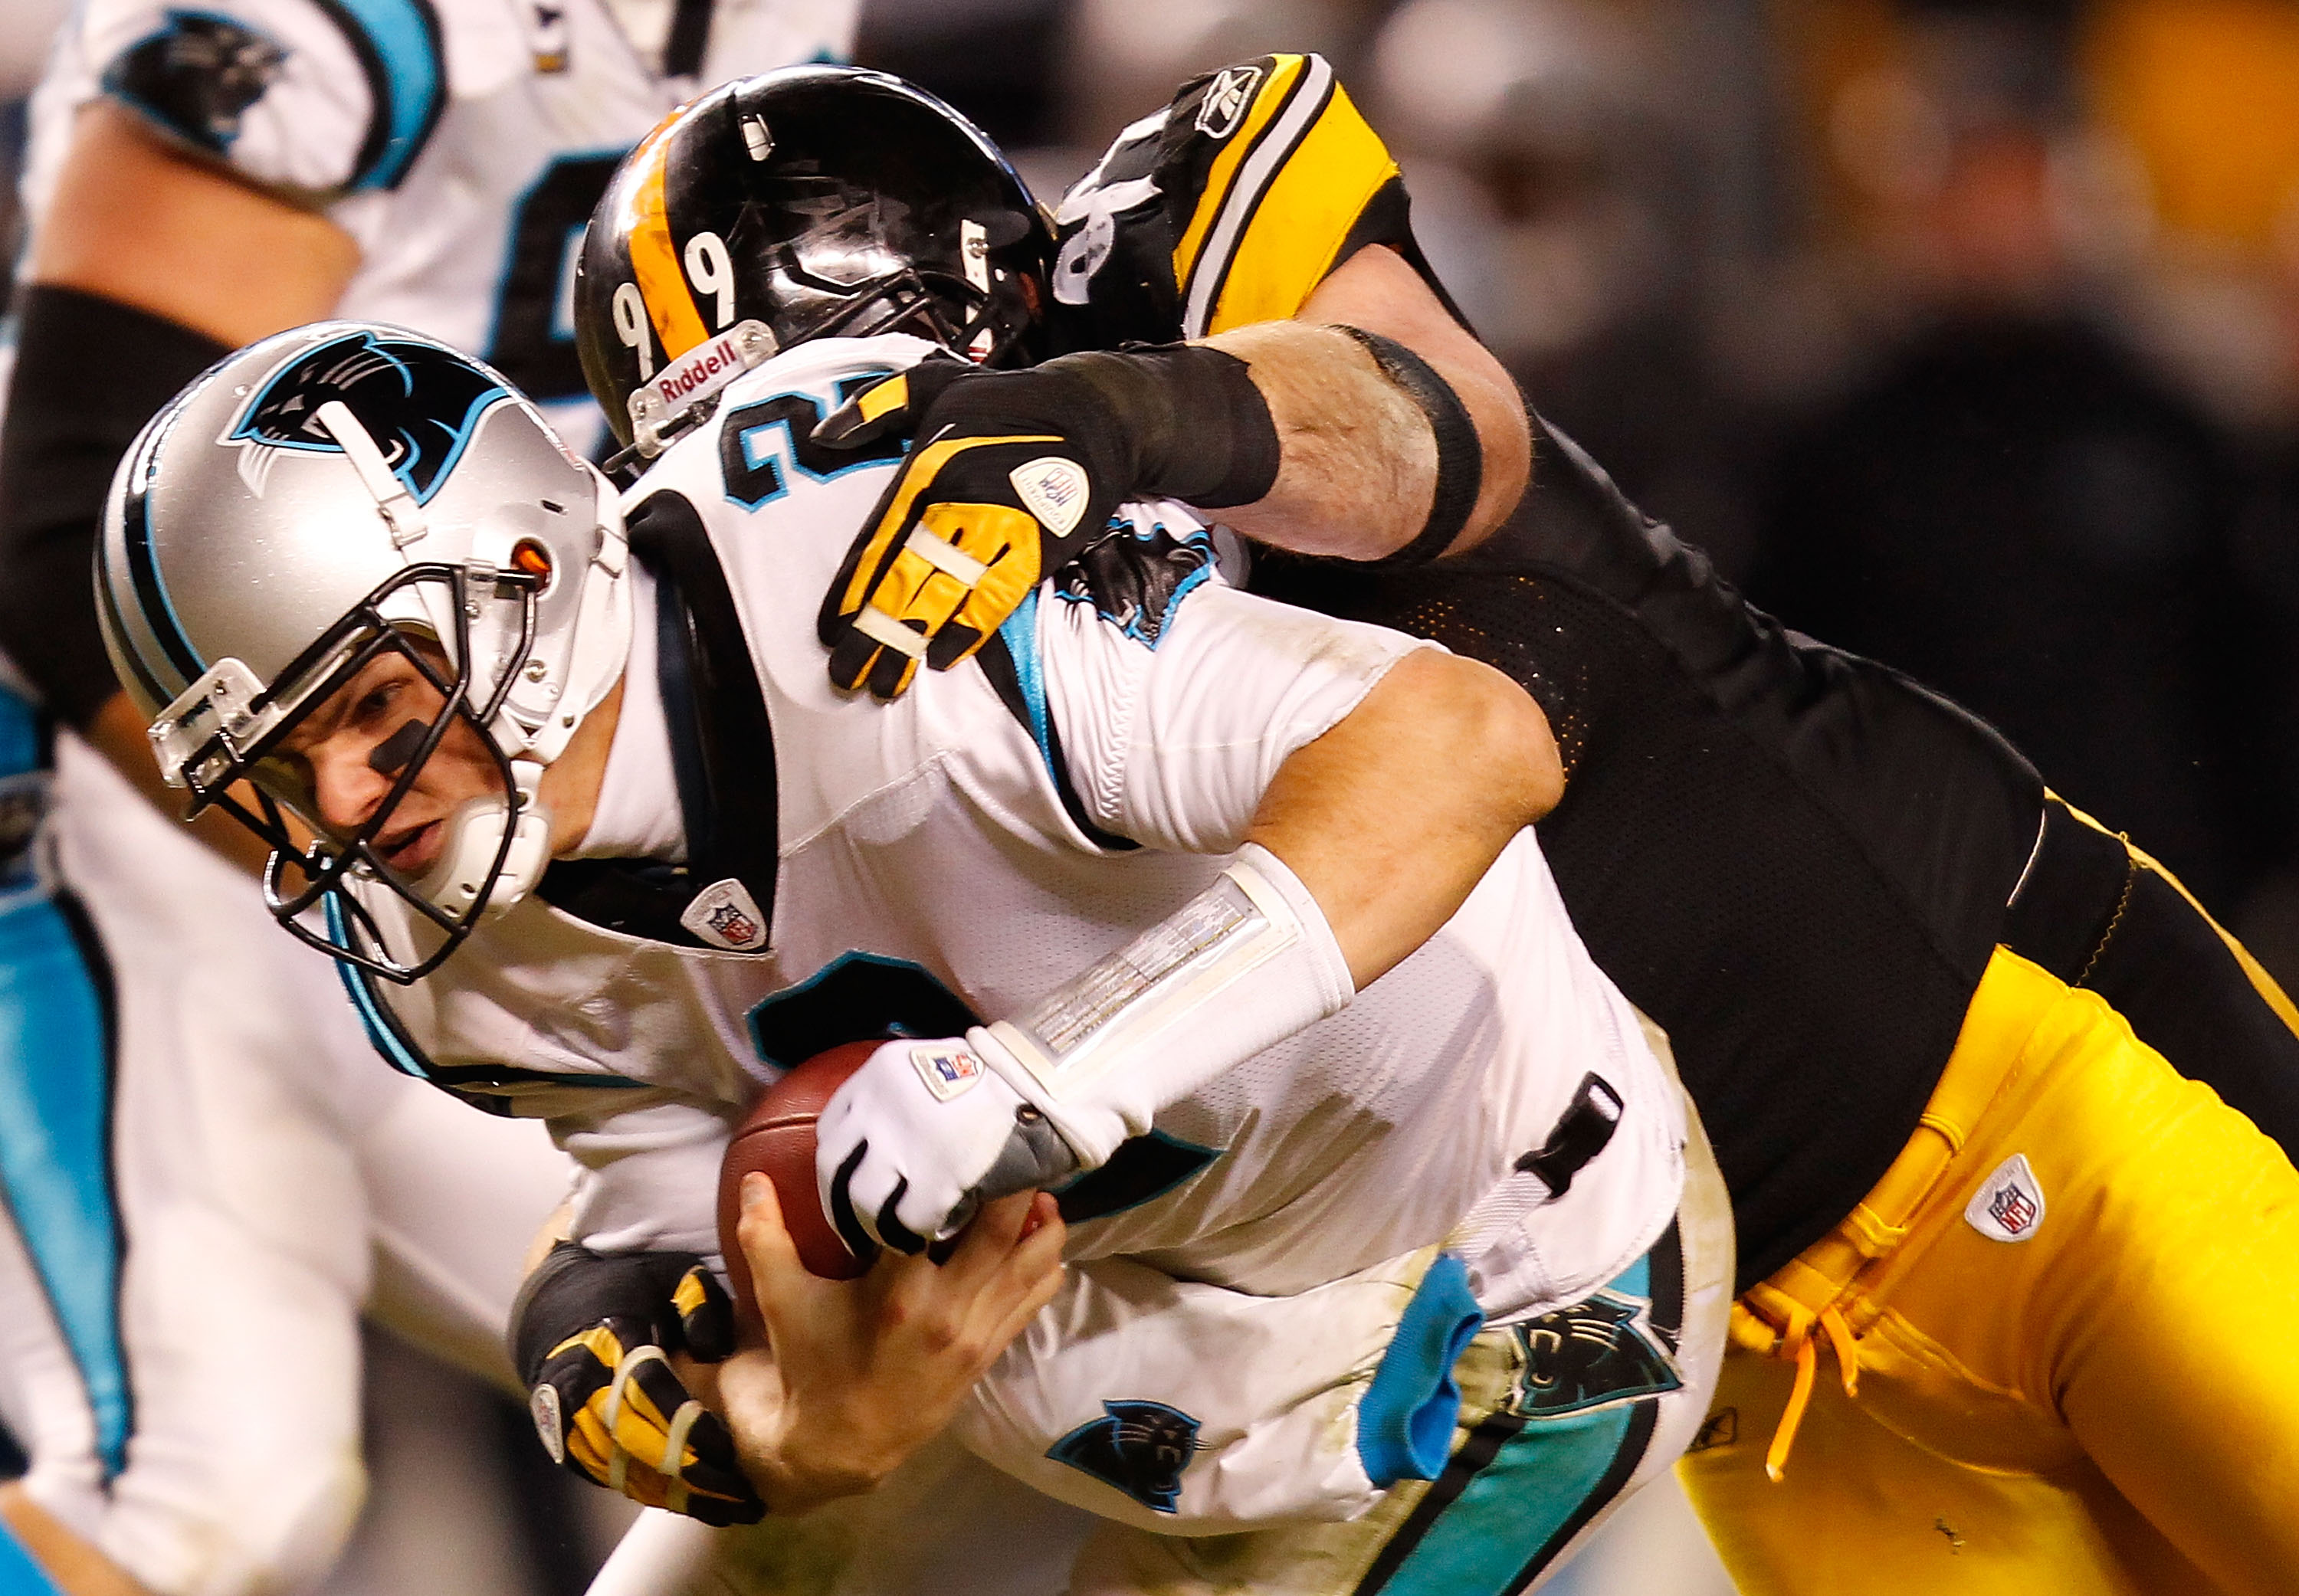 PITTSBURGH - DECEMBER 23:  Jimmy Clausen #2 of the Carolina Panthers is sacked by Brett Keisel #99 of the Pittsburgh Steelers during the game on December 23, 2010 at Heinz Field in Pittsburgh, Pennsylvania.  (Photo by Jared Wickerham/Getty Images)